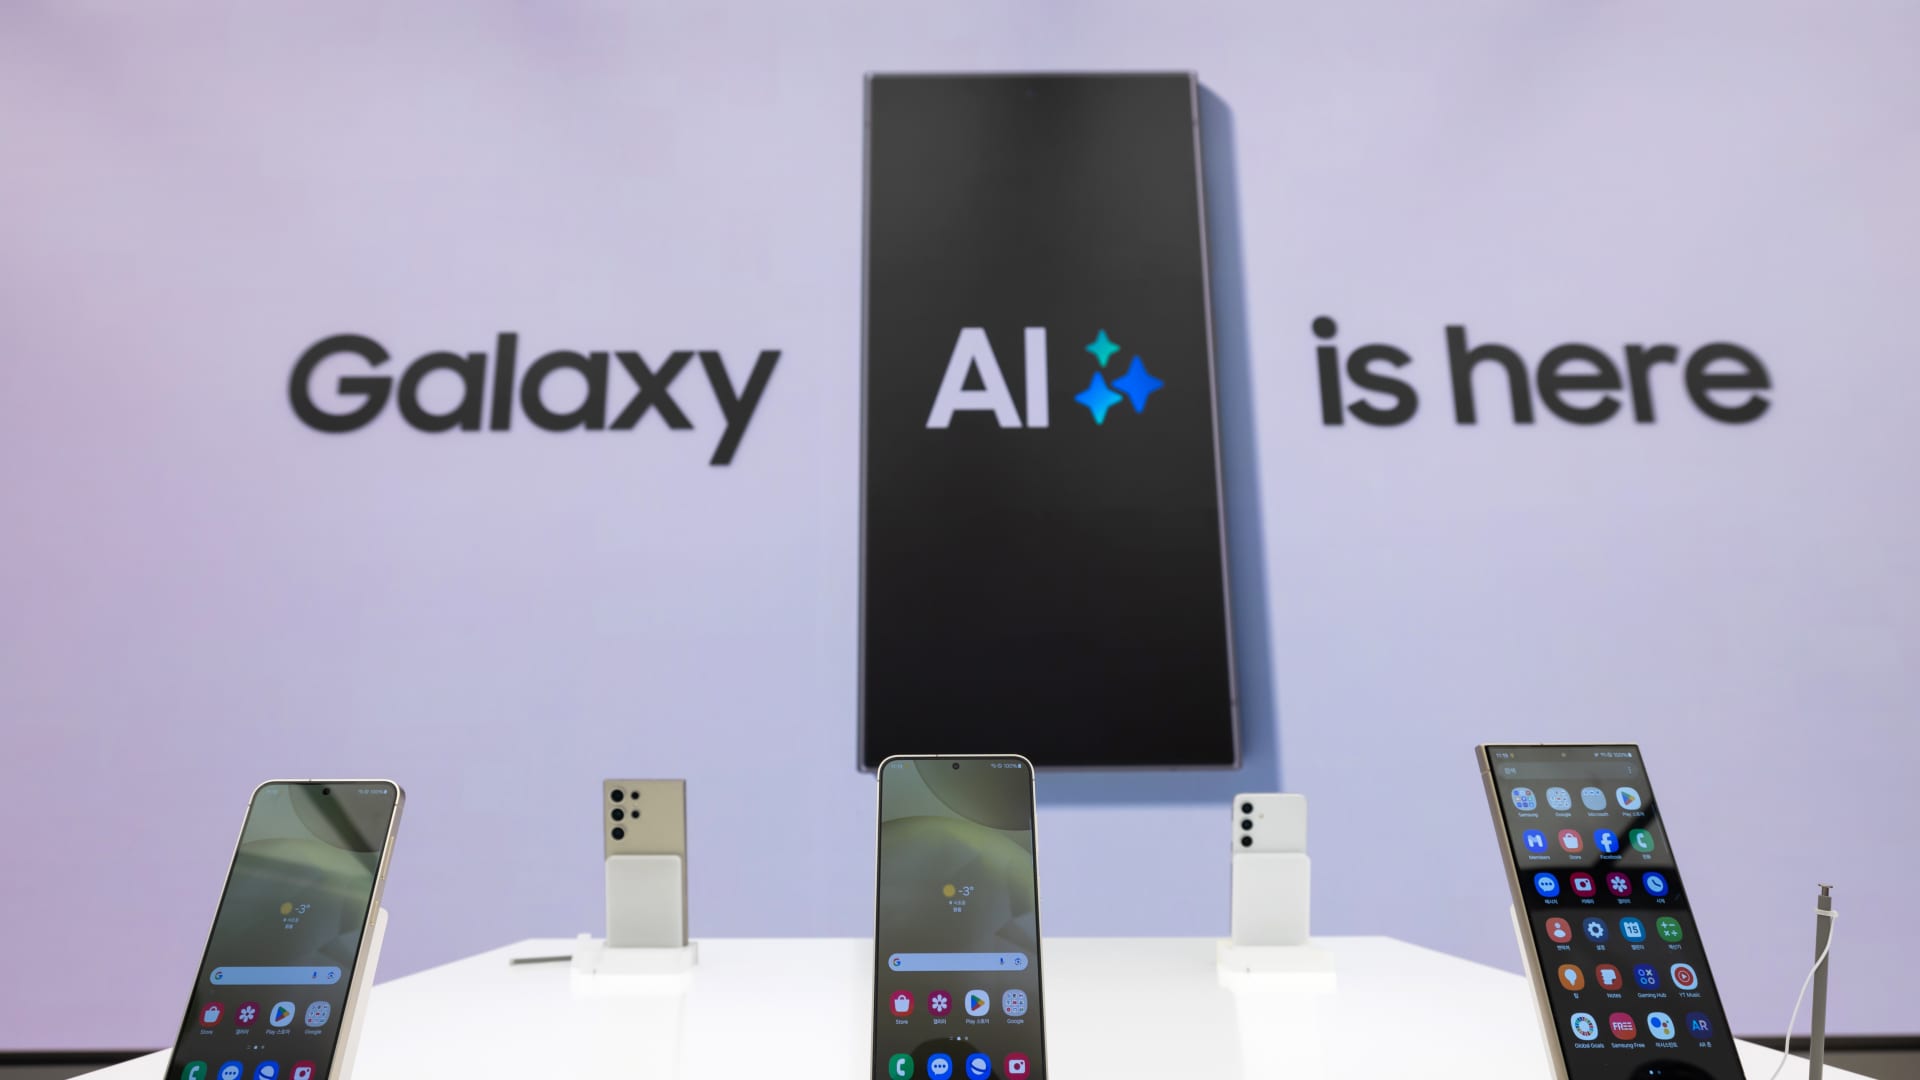 Samsung says it could upgrade Bixby with generative AI